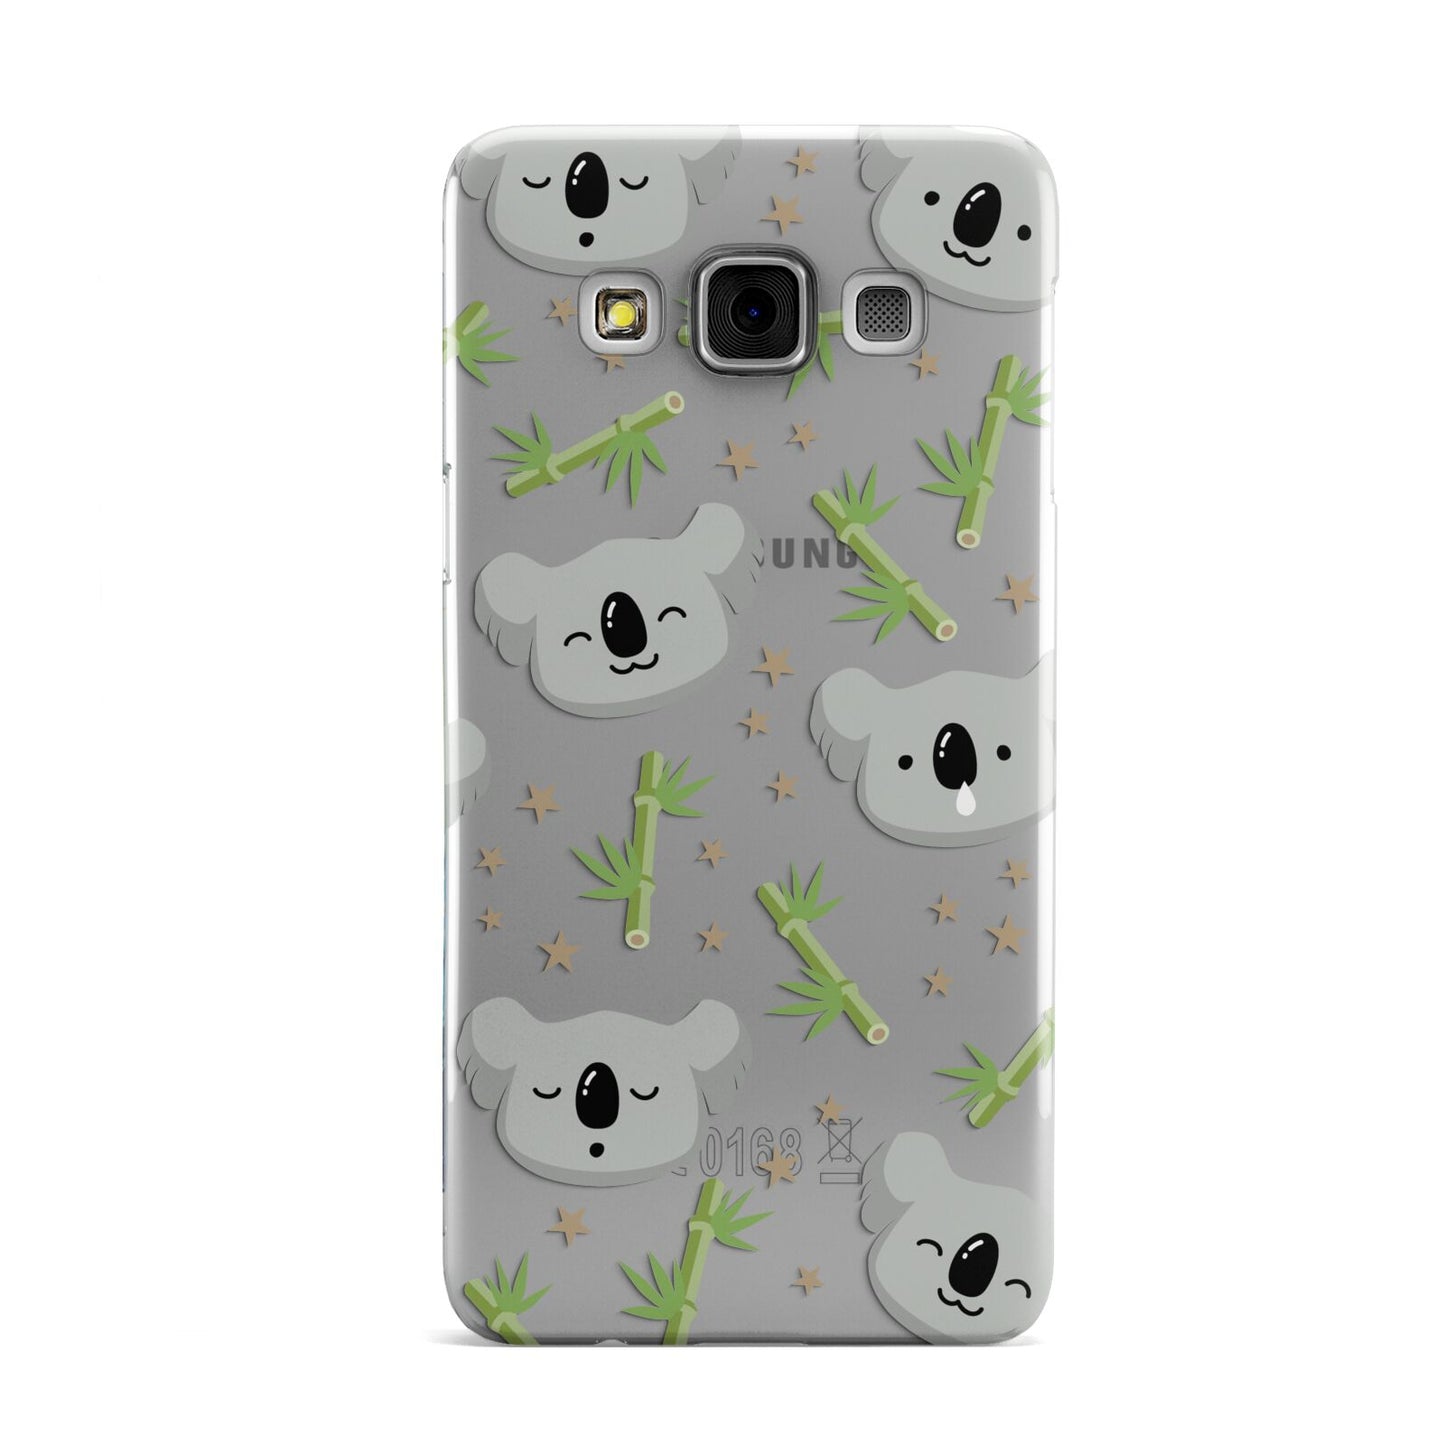 Koala Faces with Transparent Background Samsung Galaxy A3 Case